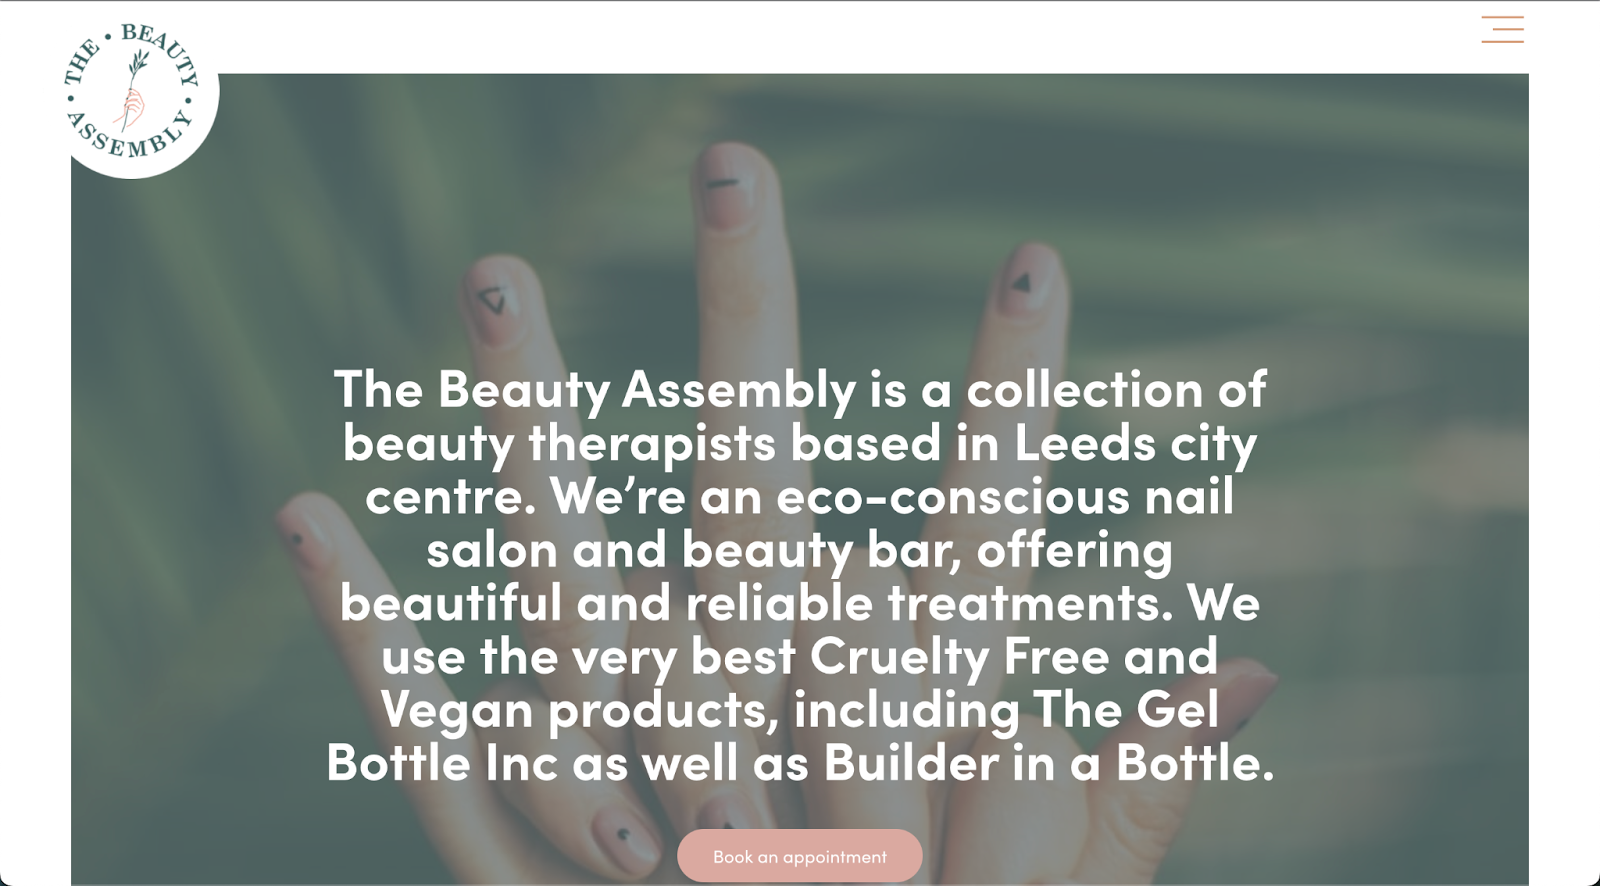 Best nail salon websites, example from The Beauty Assembly.